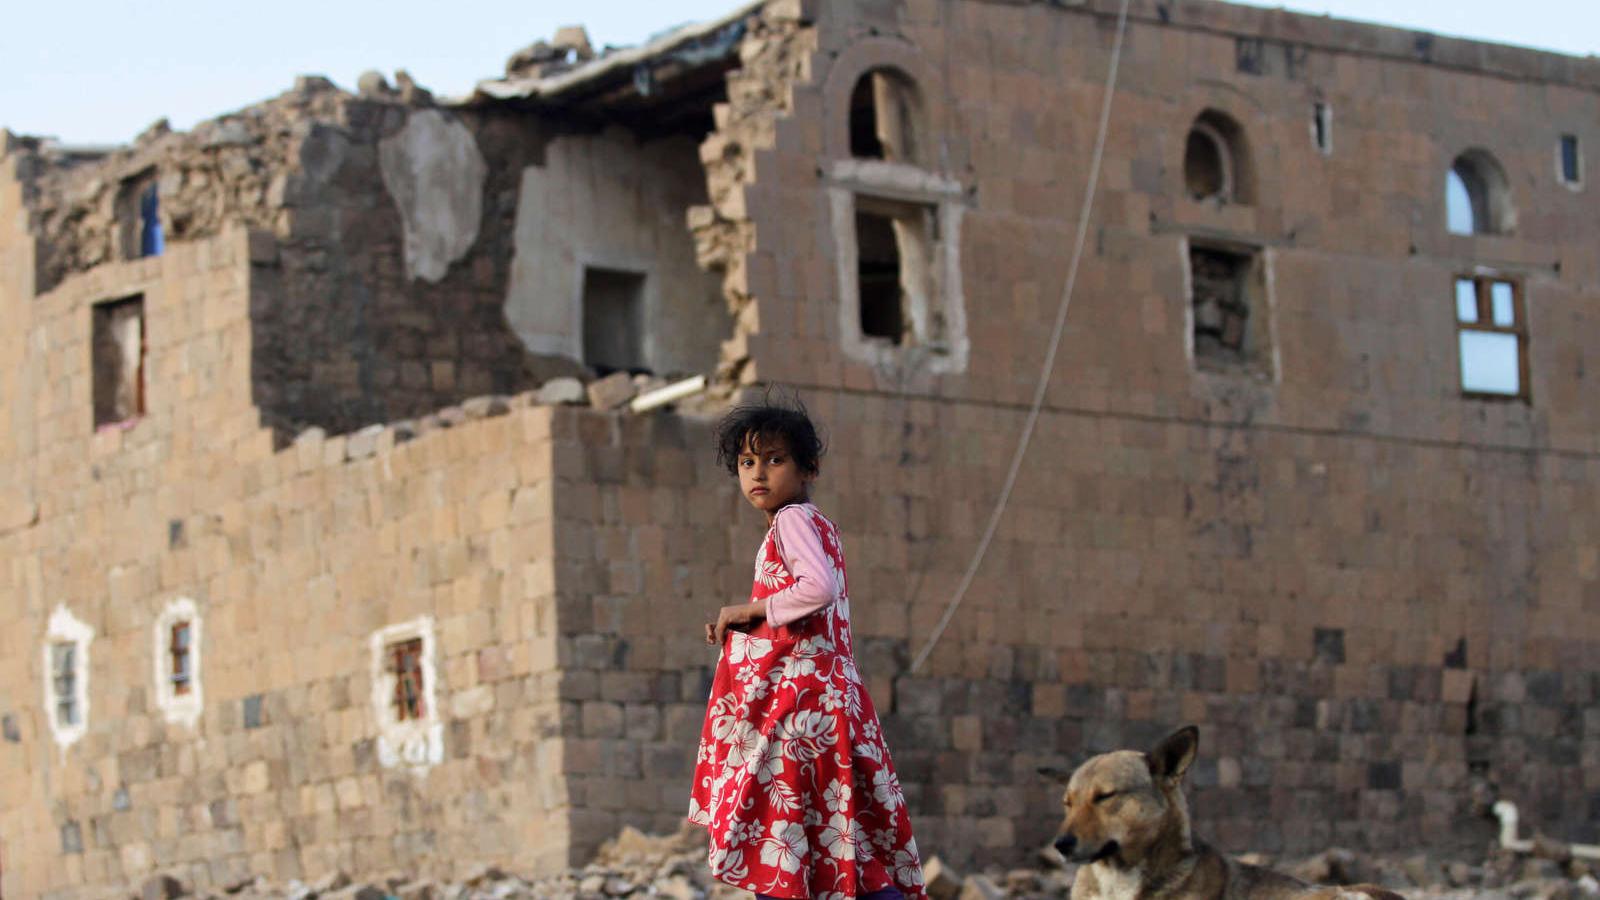 A little girl wearing a red dress stands next to a dog near a destroyed building. 